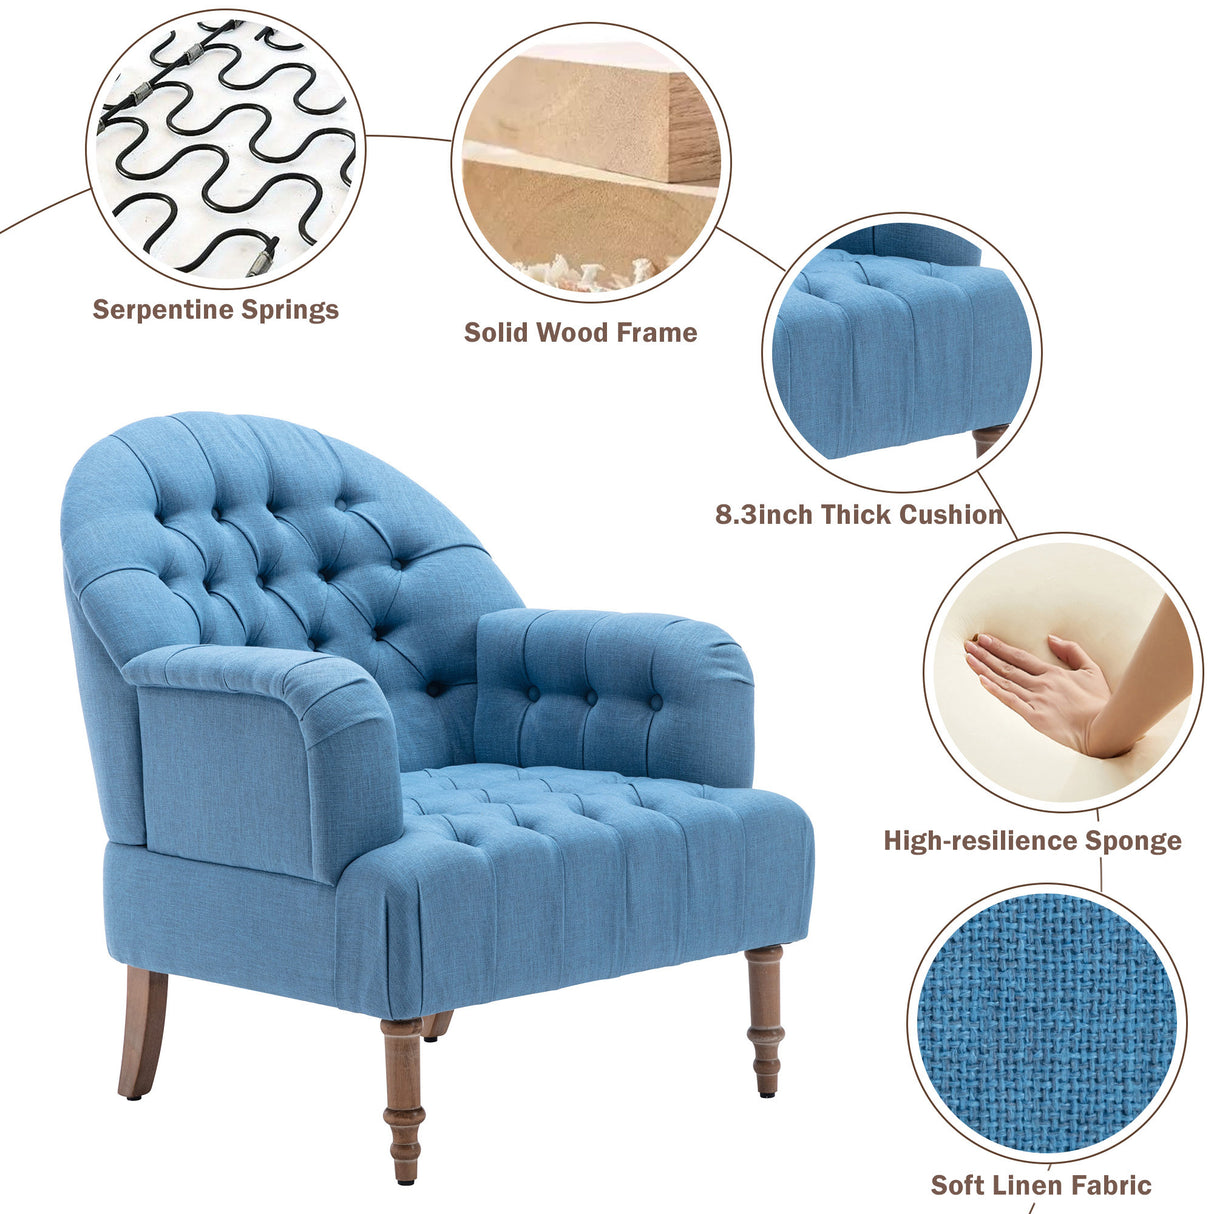 Accent Chair,Button-Tufted Upholstered Chair Set ,Mid Century Modern Chair with Linen Fabric and Ottoman for Living Room Bedroom Office Lounge,Blue - Home Elegance USA